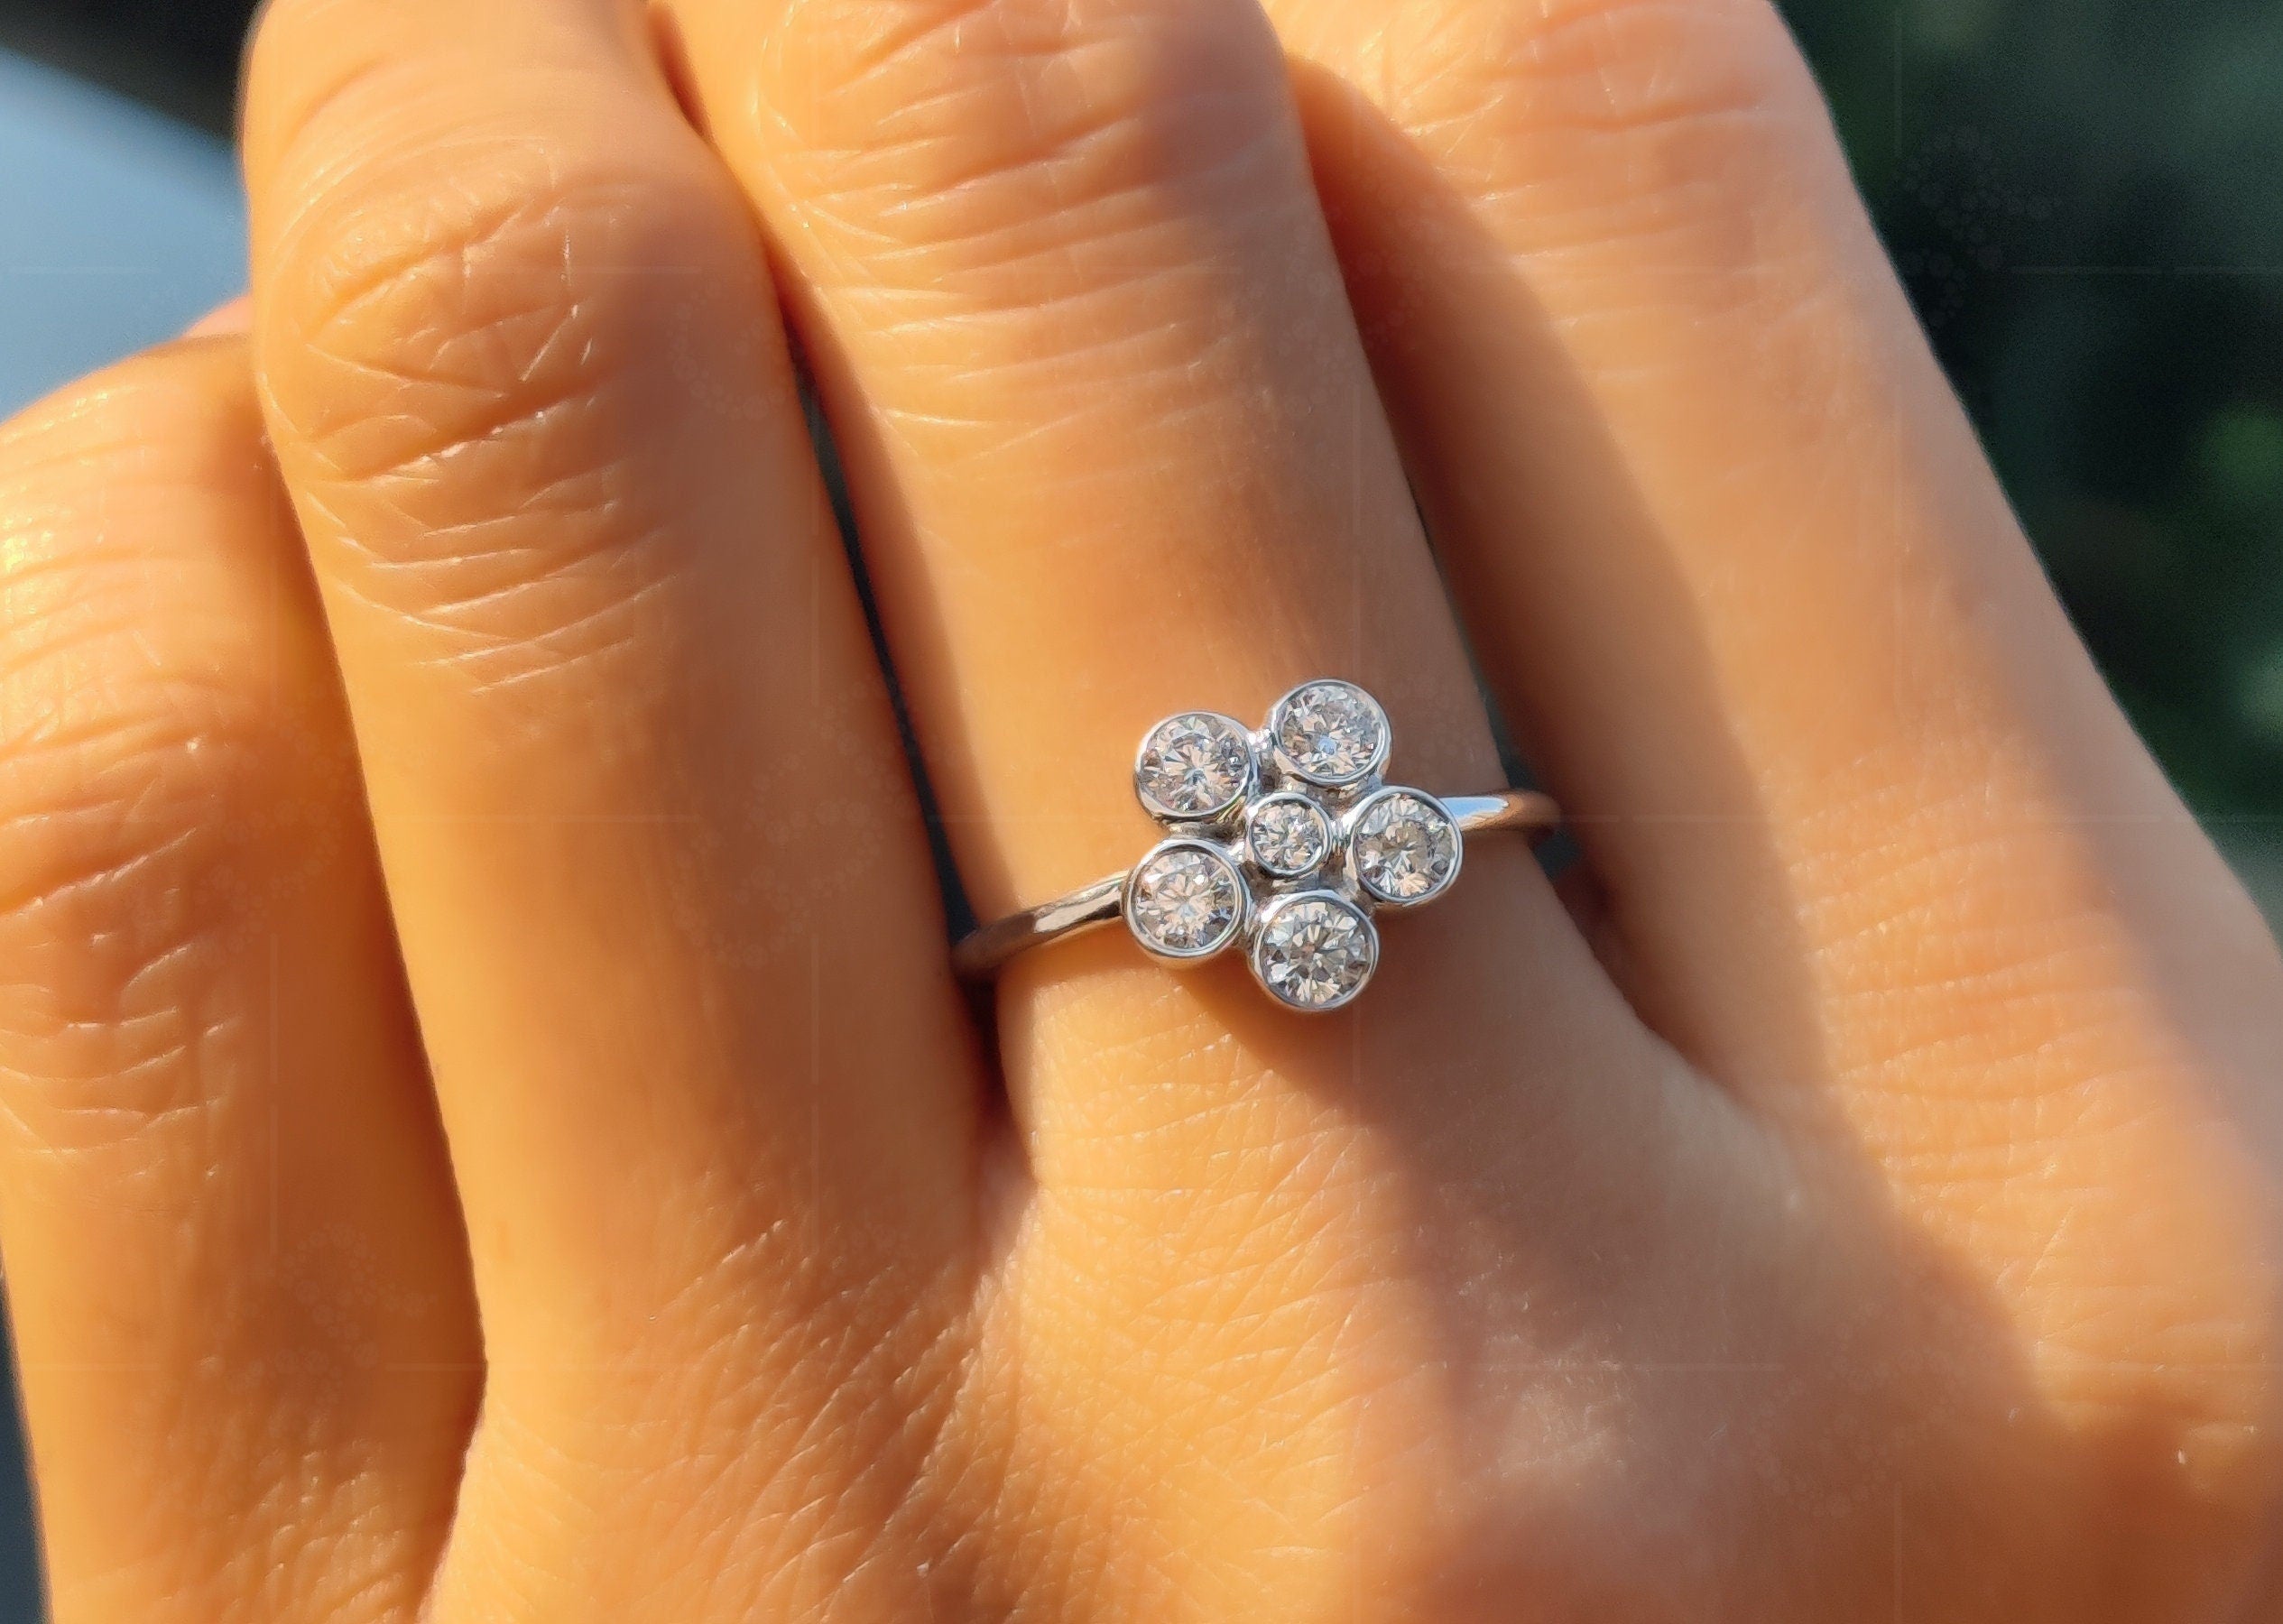 6 Stone Flower Cluster Moissanite Ring - Round Floral Engagement Ring in Silver and Gold - Minimalist Dainty Wedding Ring